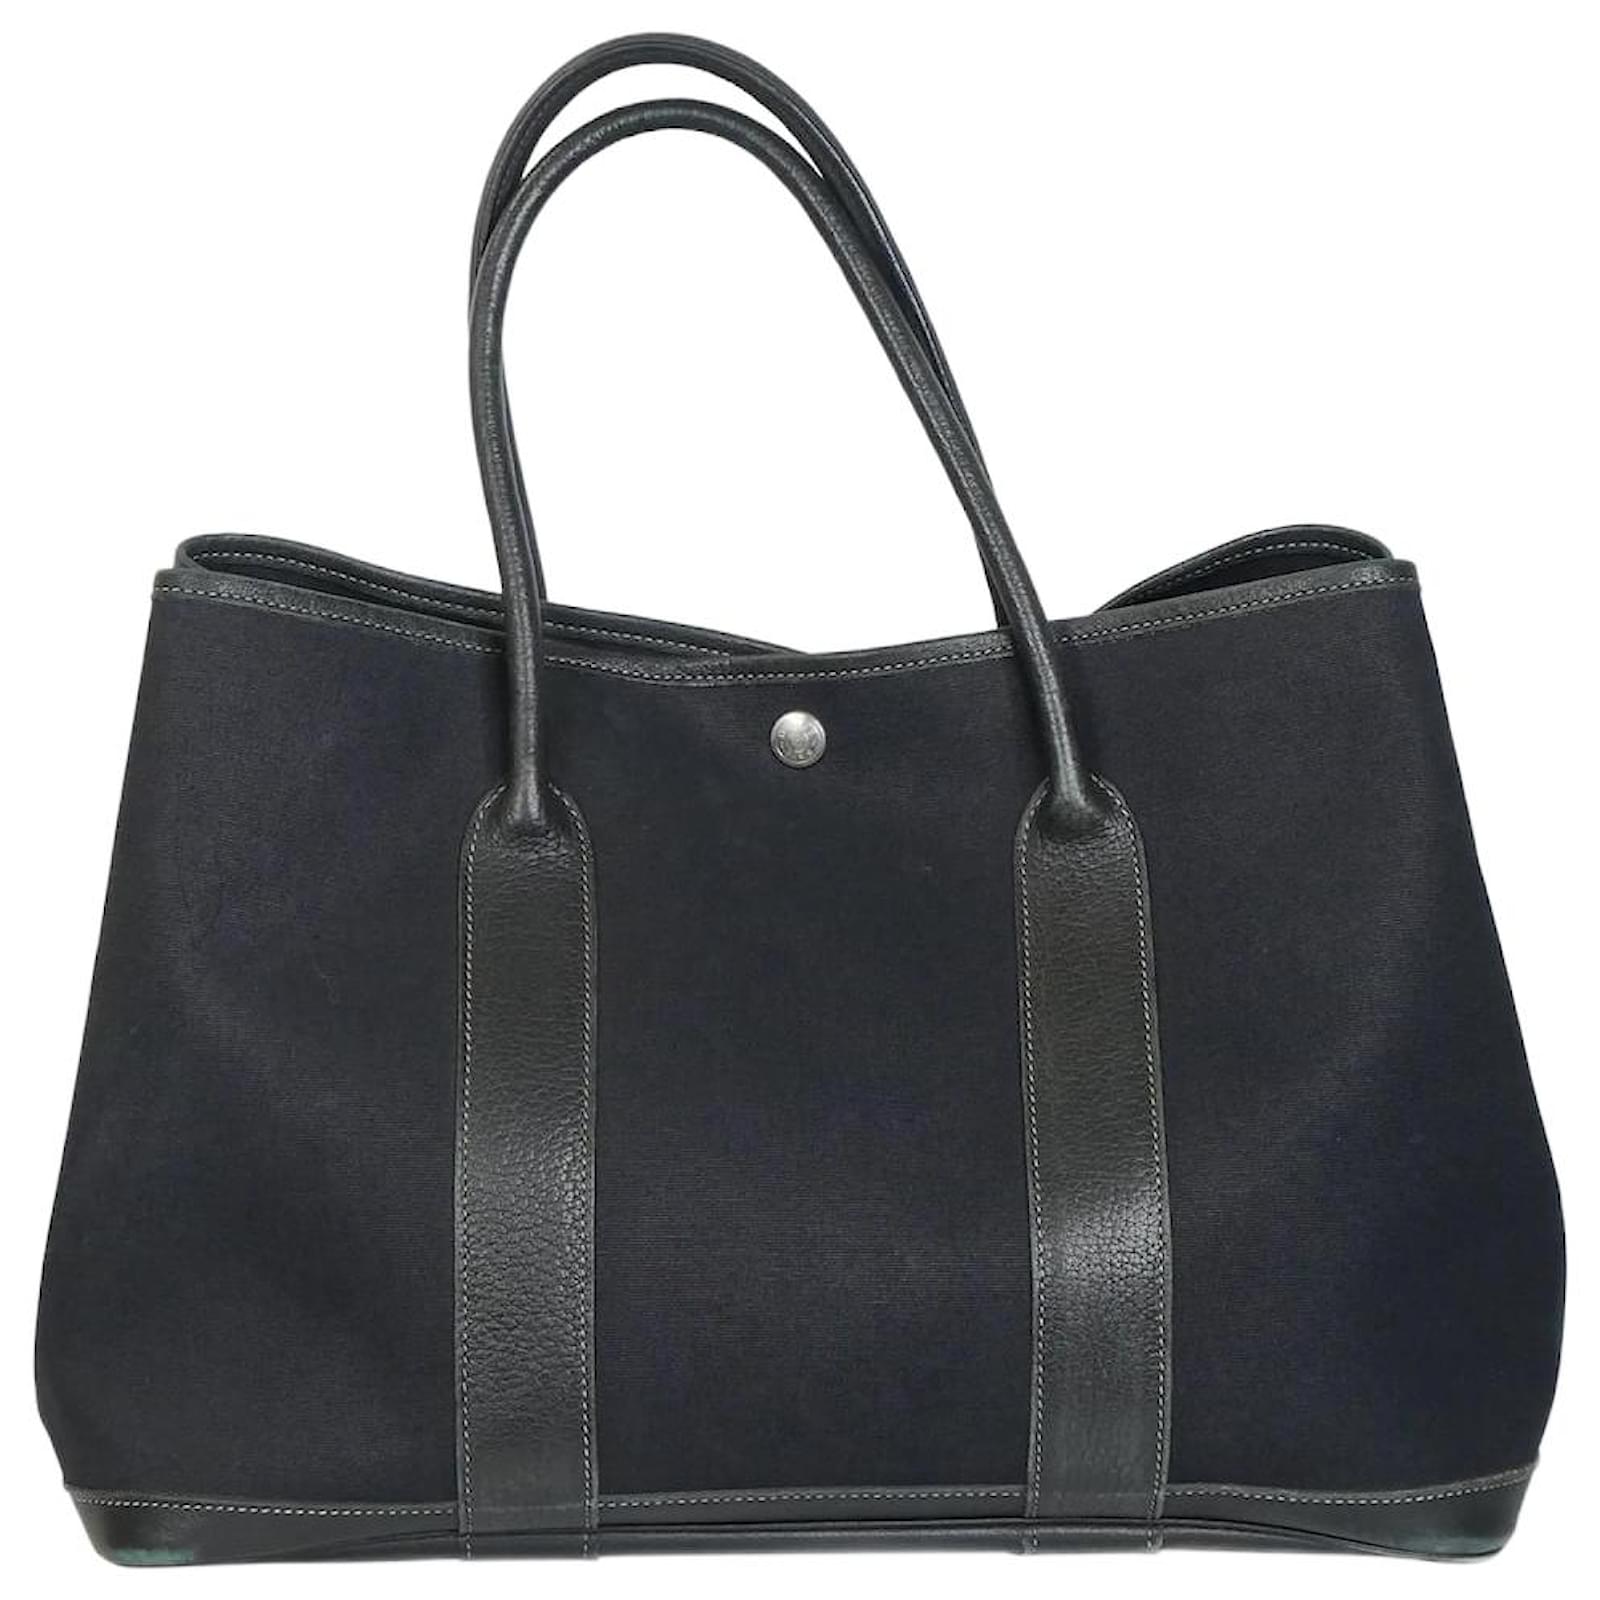 Hermes Garden Party Womens Totes, Black